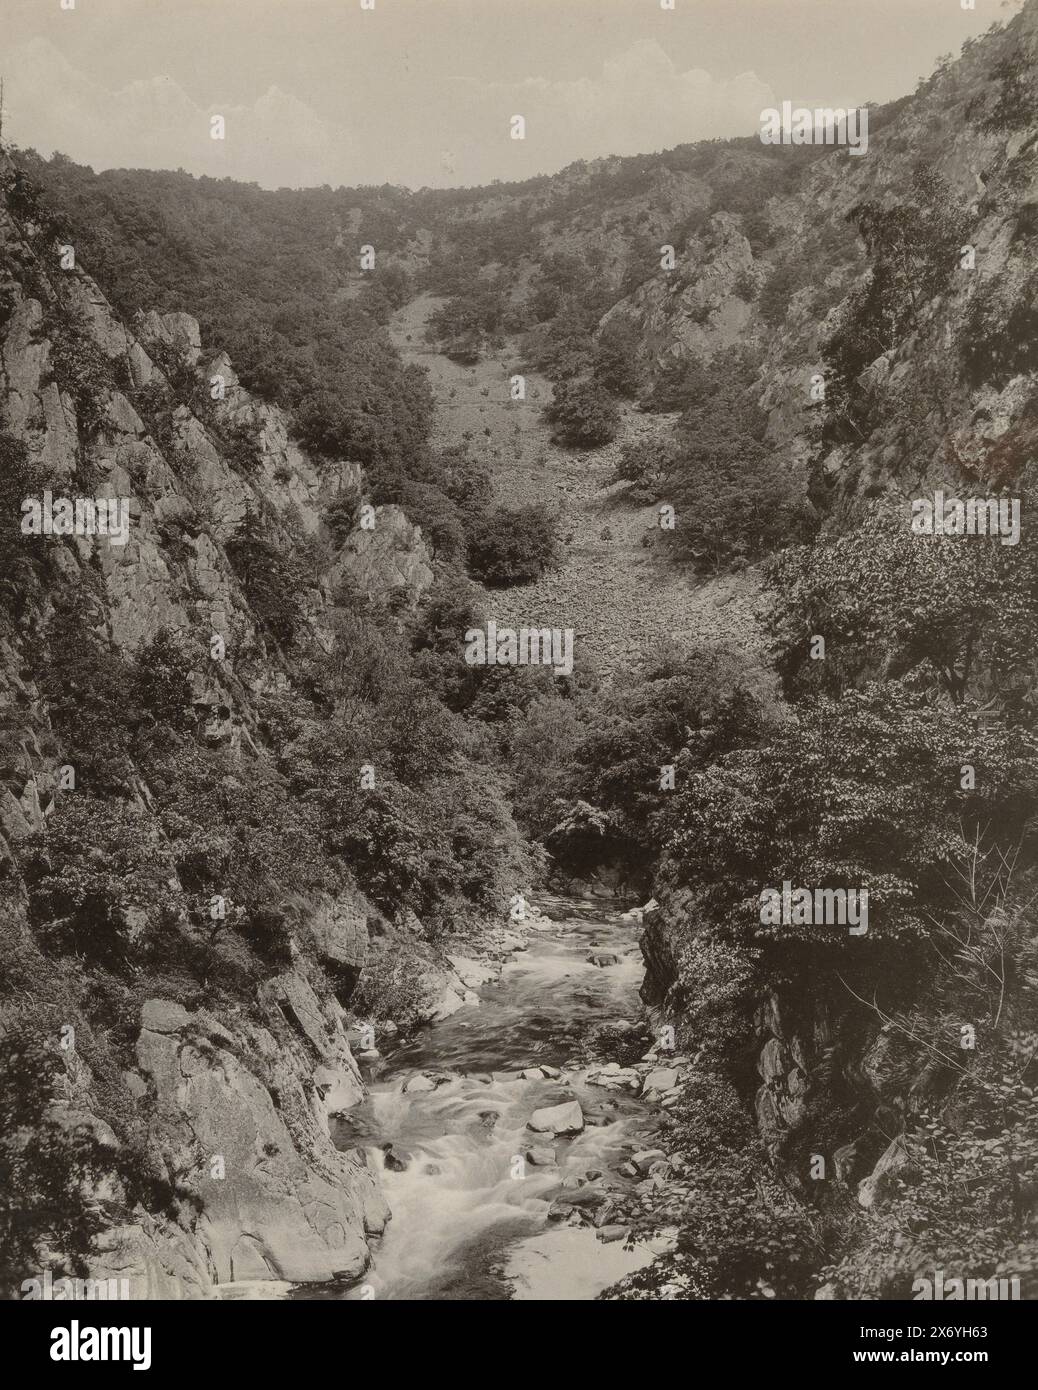 View of the Schorre in the Bodetal, Thale u. Bodetal, die Schurre vom Bodethal (title on object), photomechanical print, anonymous, anonymous, publisher: Stengel & Co., (mentioned on object), Bodetal, publisher: Dresden, 1898, paper, collotype, height, 285 mm × width, 220 mm Stock Photo